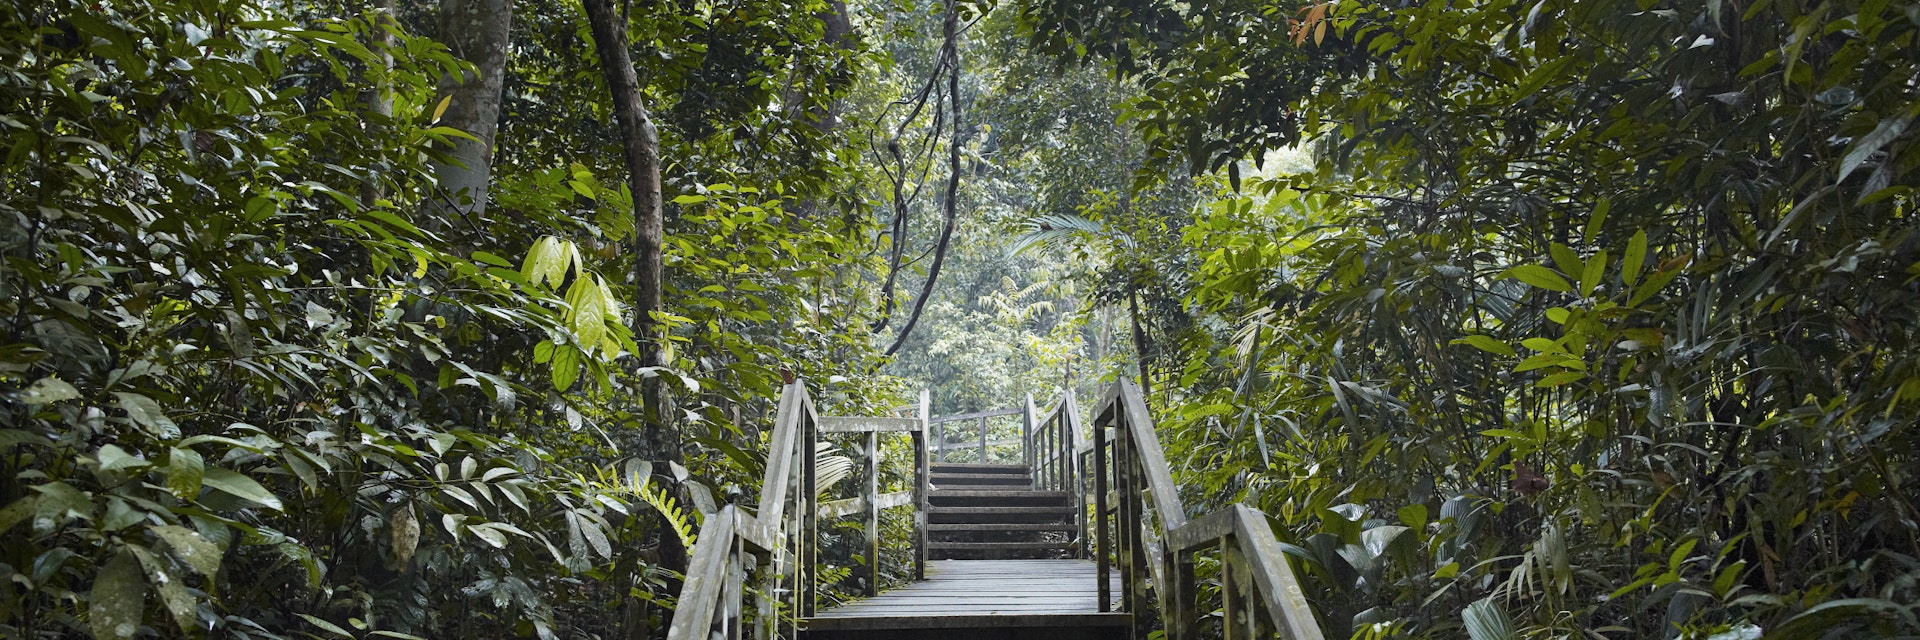 Wooden staircase in jungle scenery